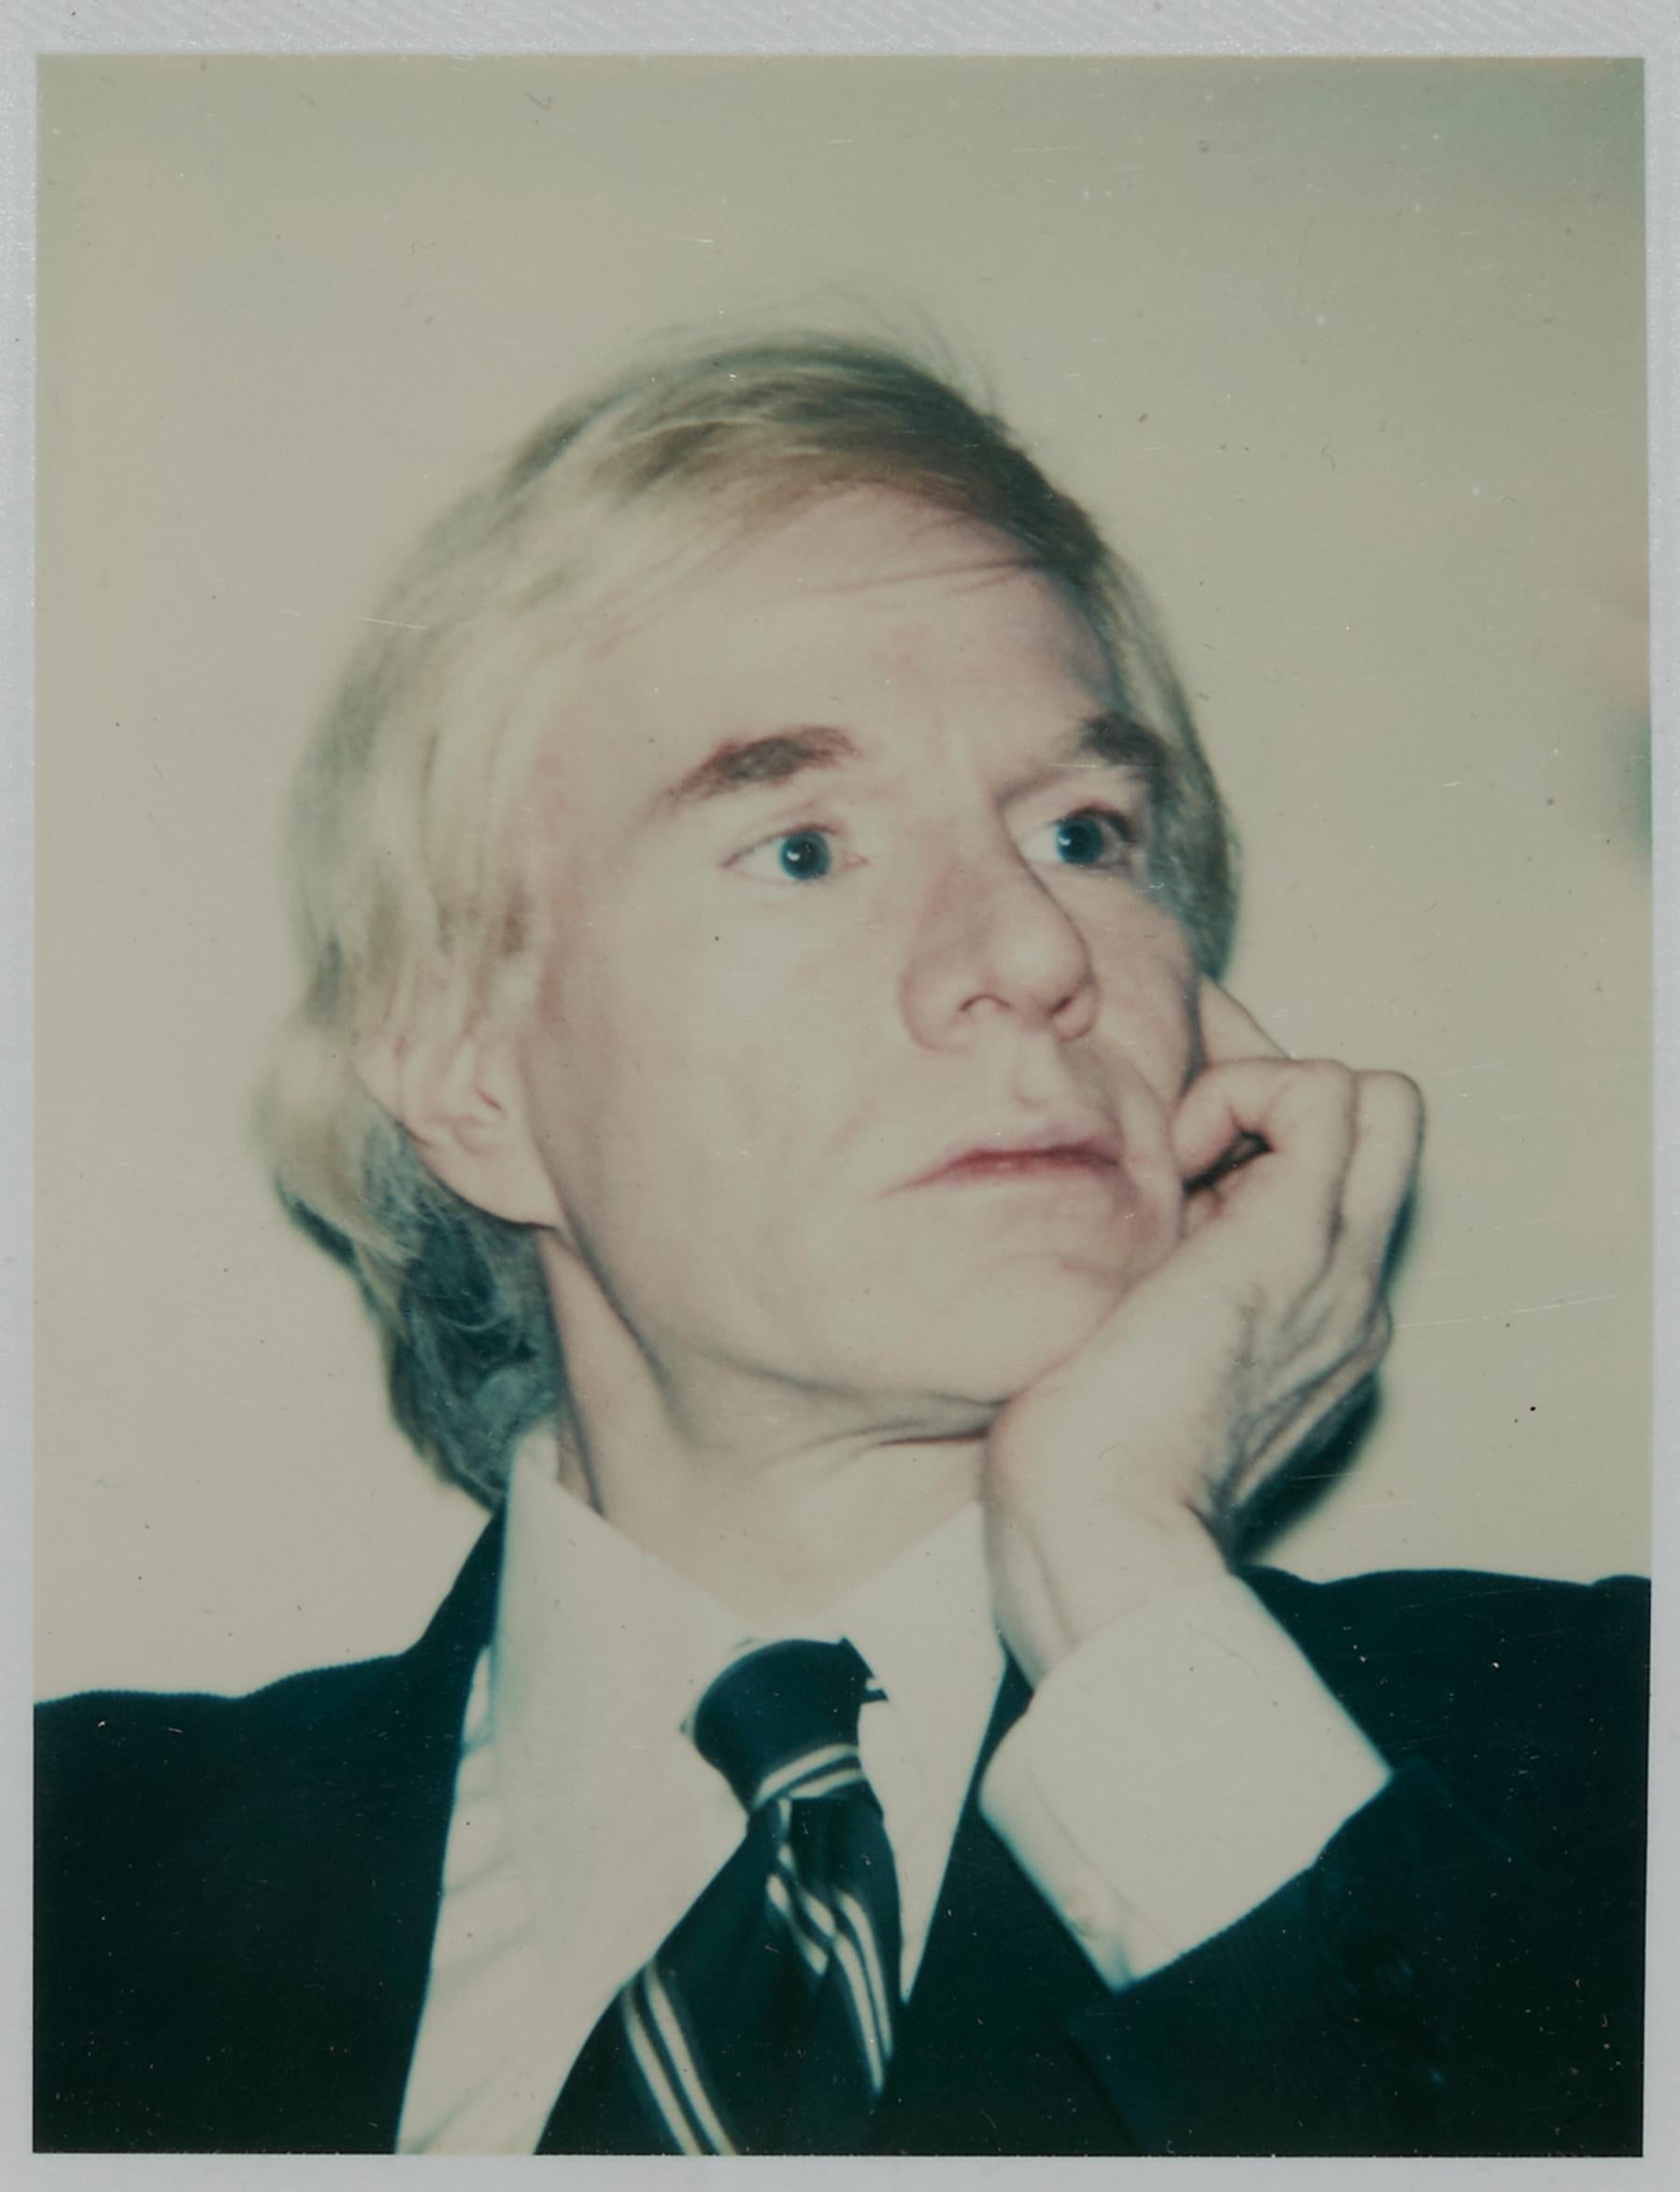 Color Polaroid Self-Portrait by Andy Warhol